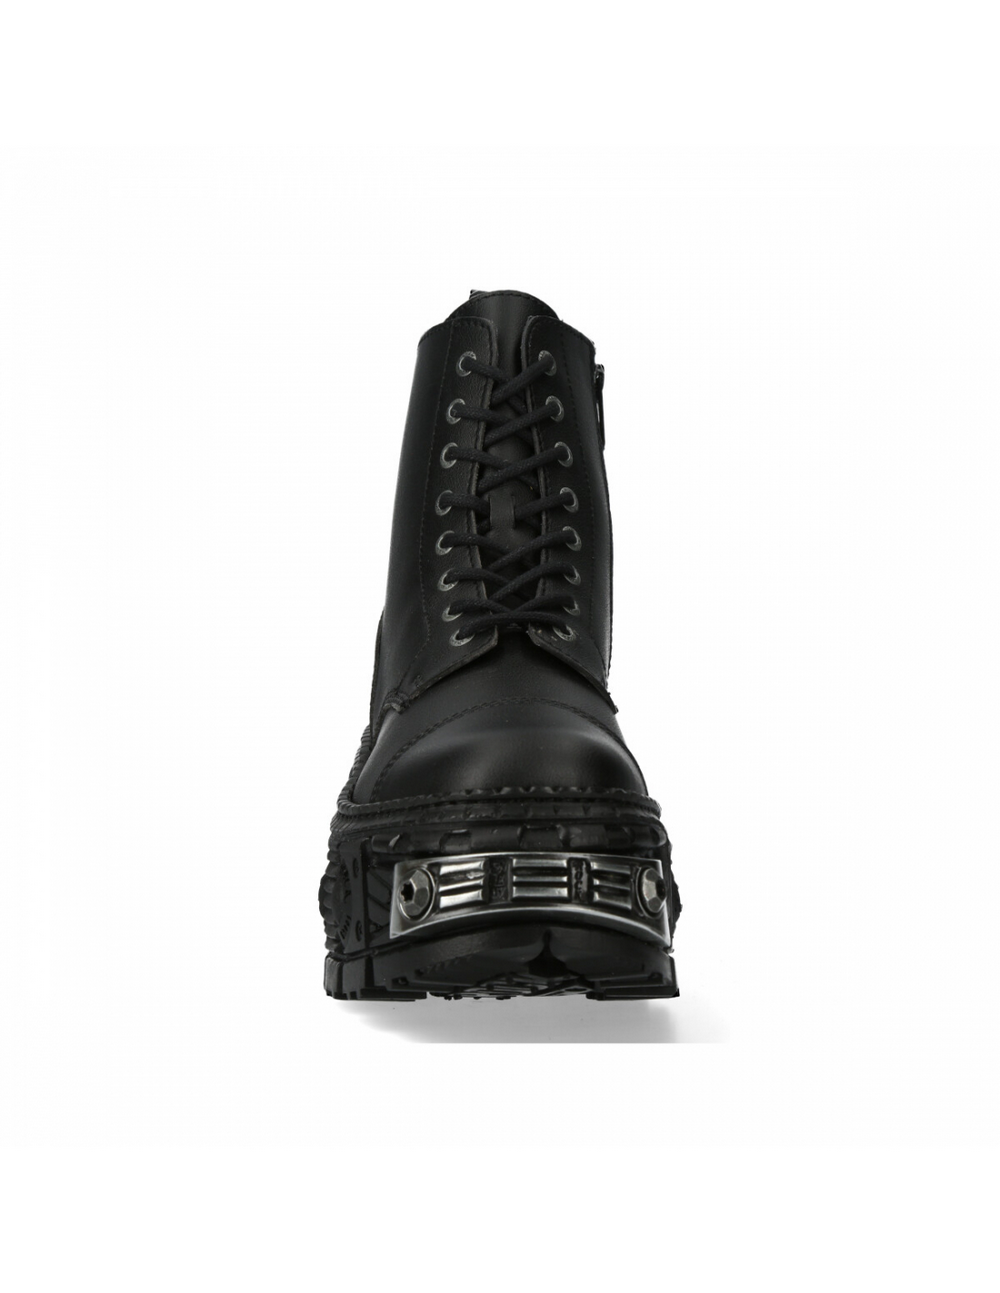 NEW ROCK Black Lace-Up Ankle Boots for Men and Women